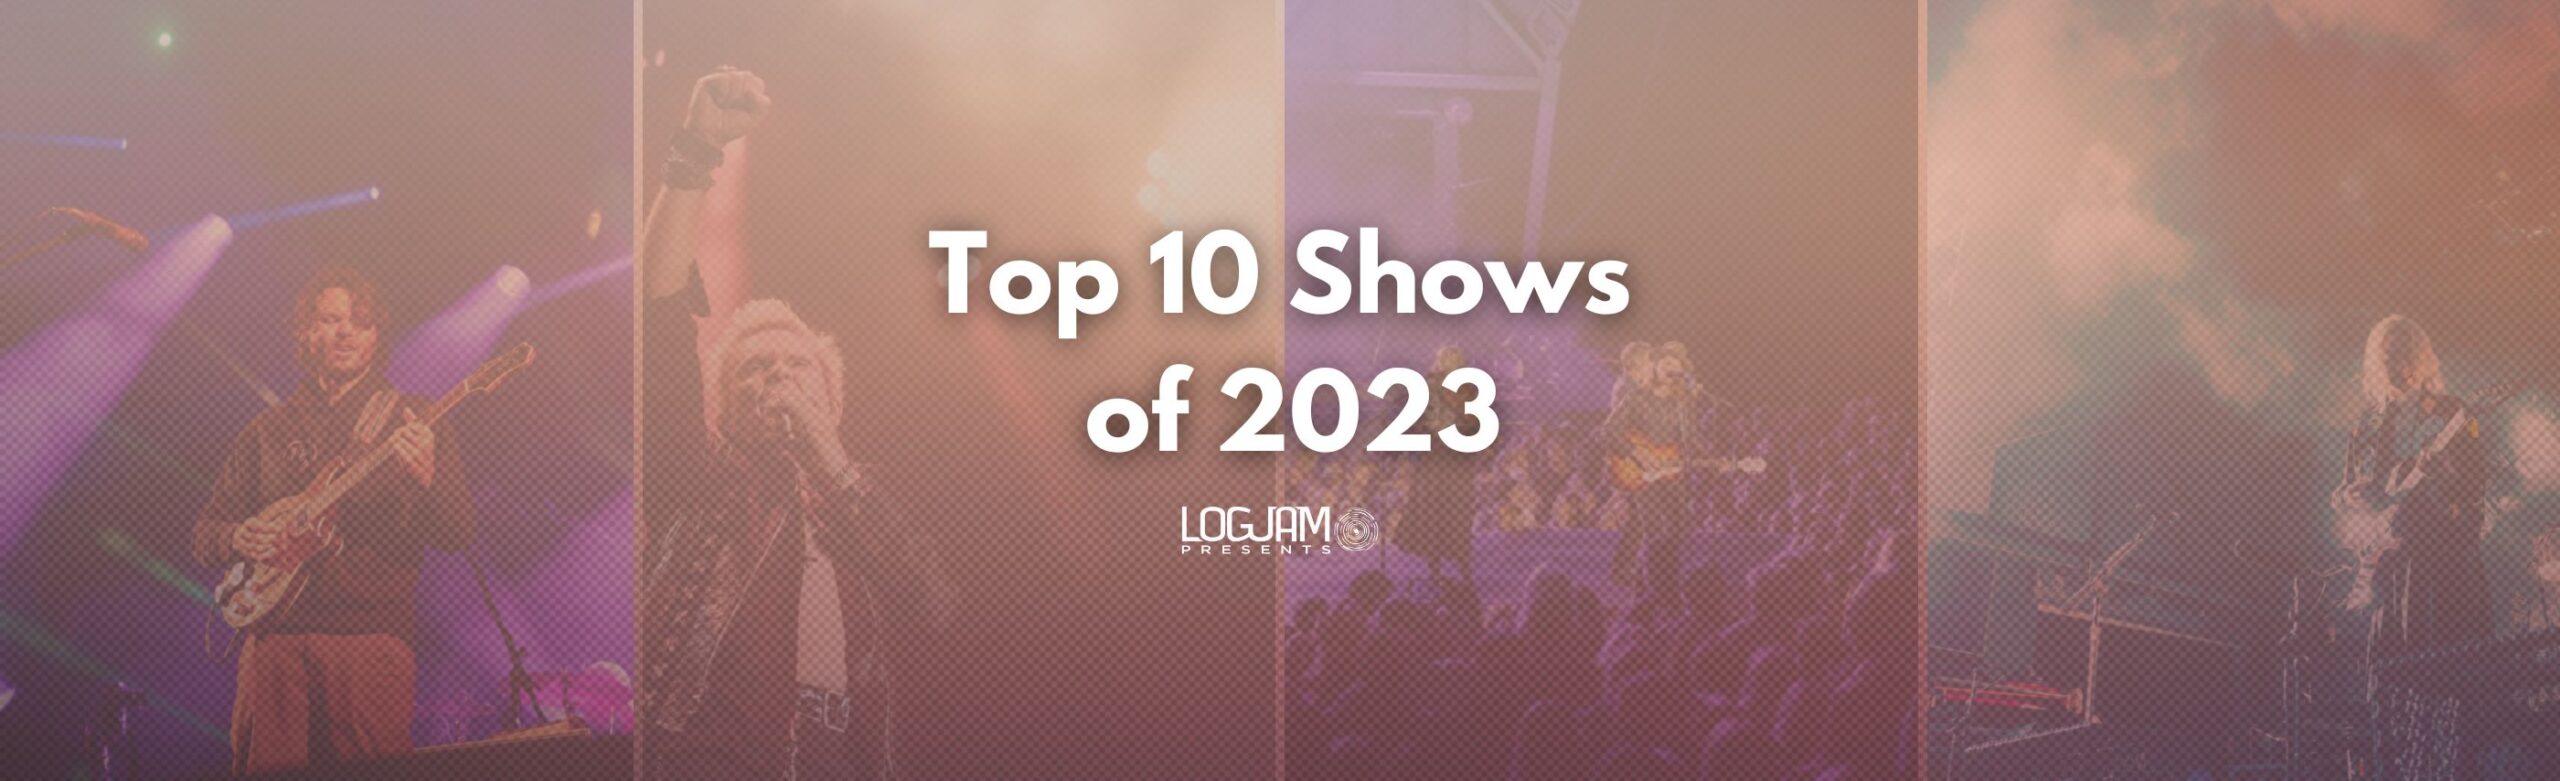 Top 10 Shows of 2023 (People’s Choice) Image